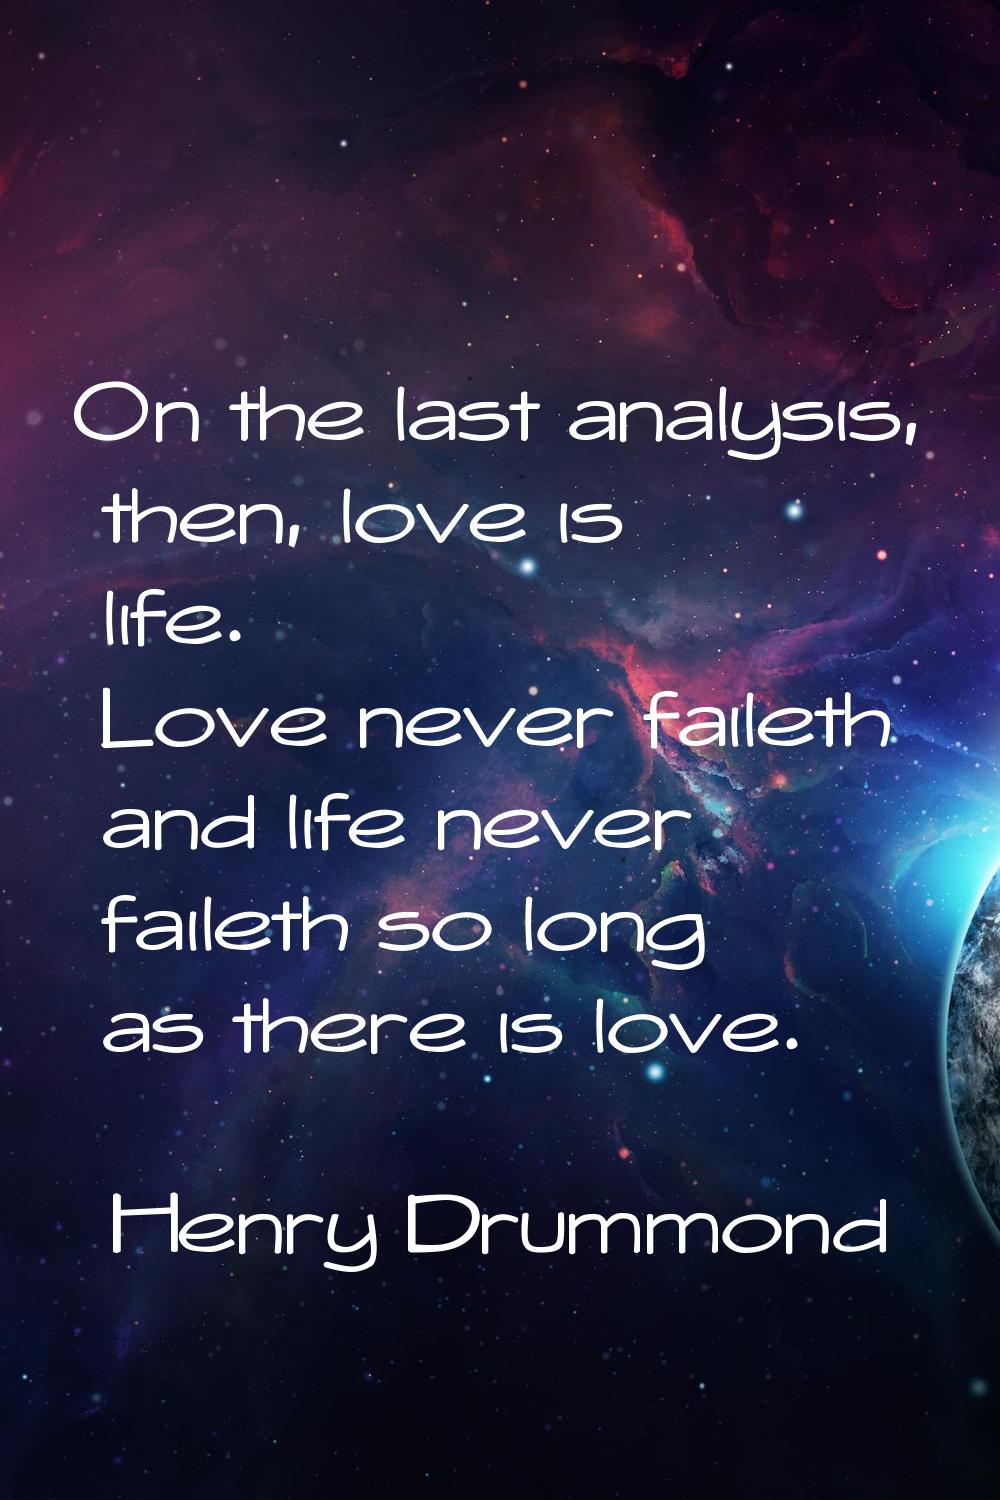 On the last analysis, then, love is life. Love never faileth and life never faileth so long as ther